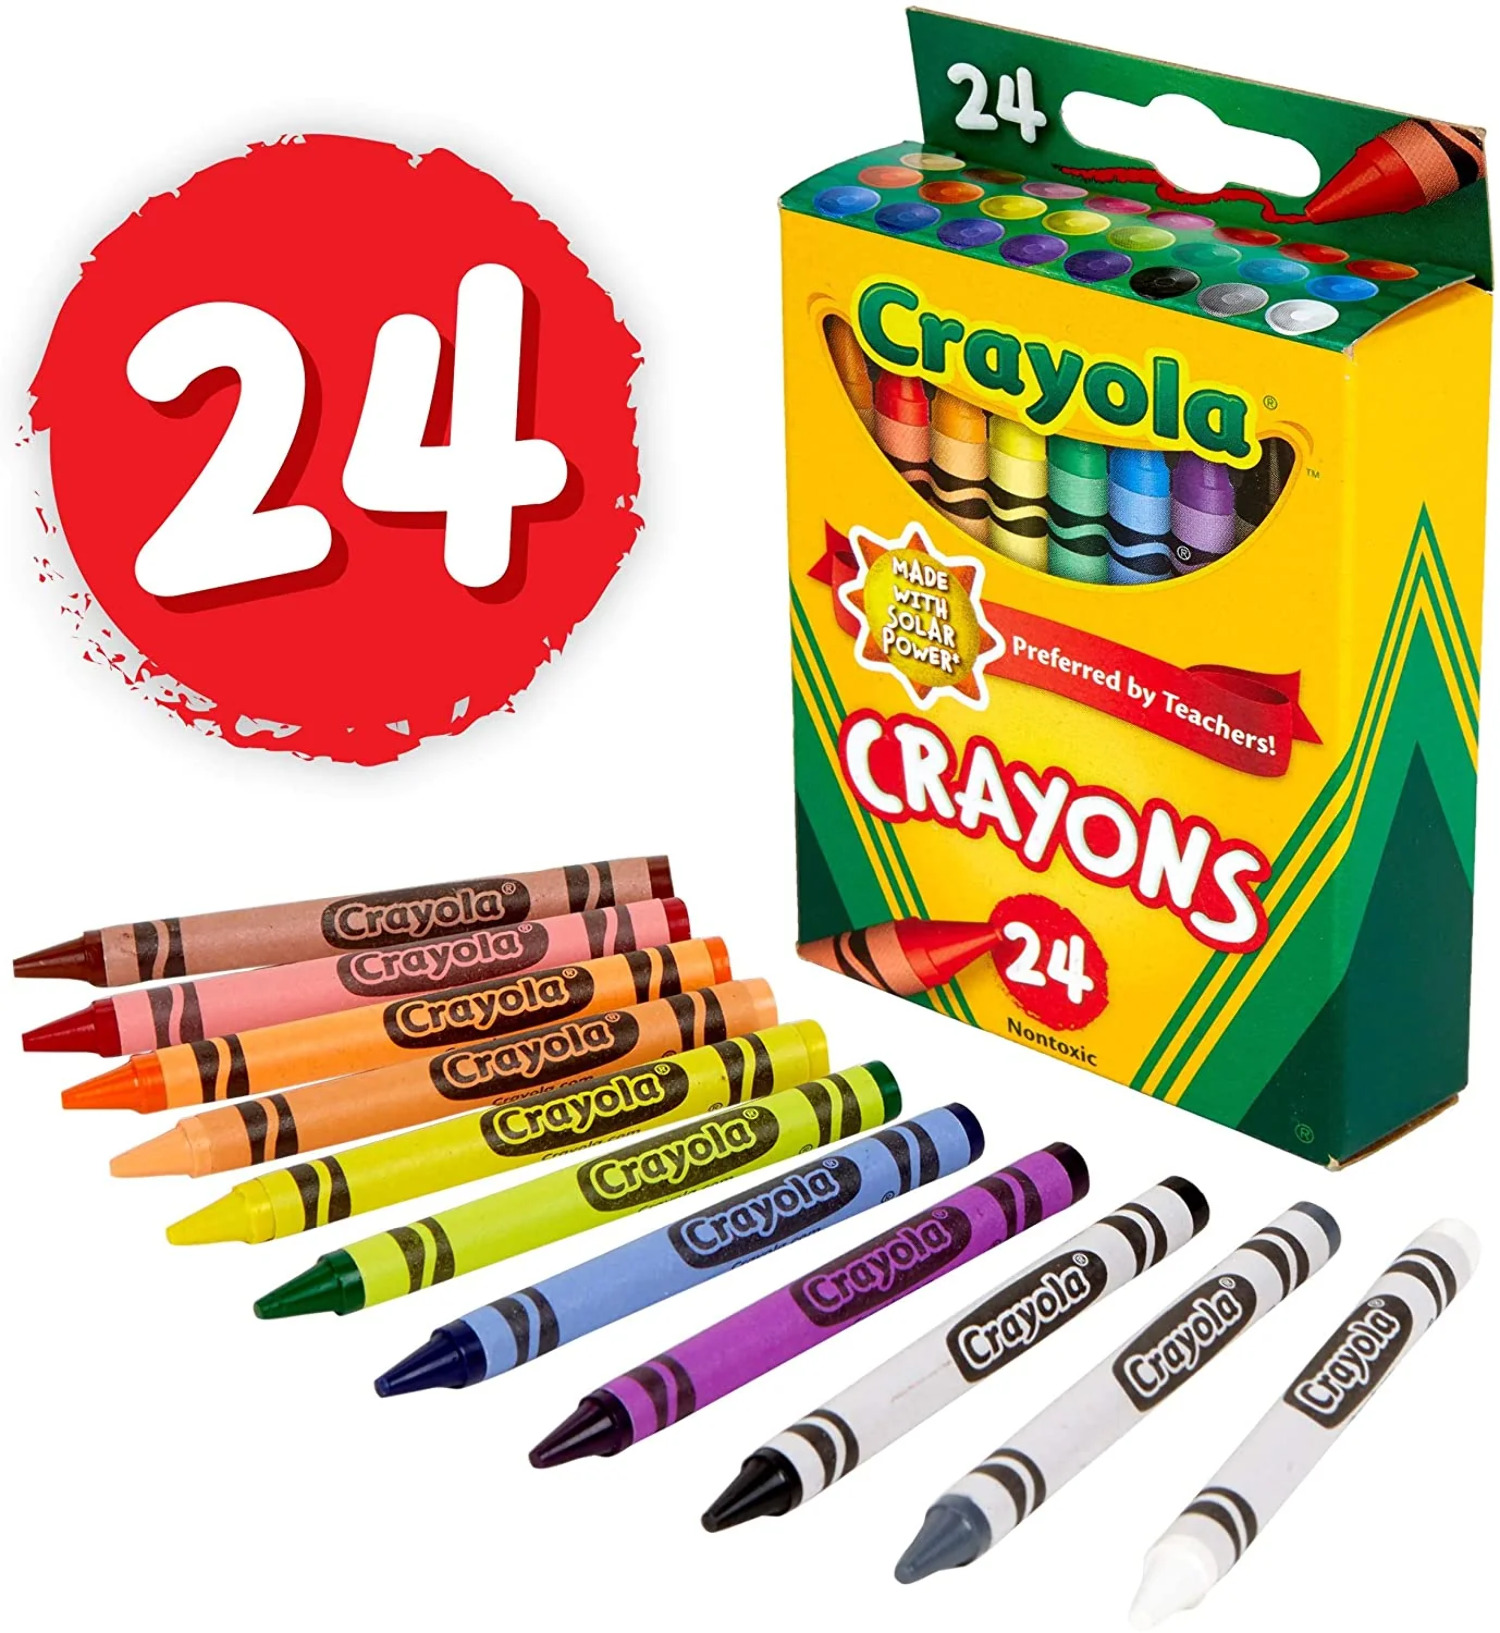 Crayola Classic Crayons, Assorted Colors, Back to School, 24 Count - image 1 of 6